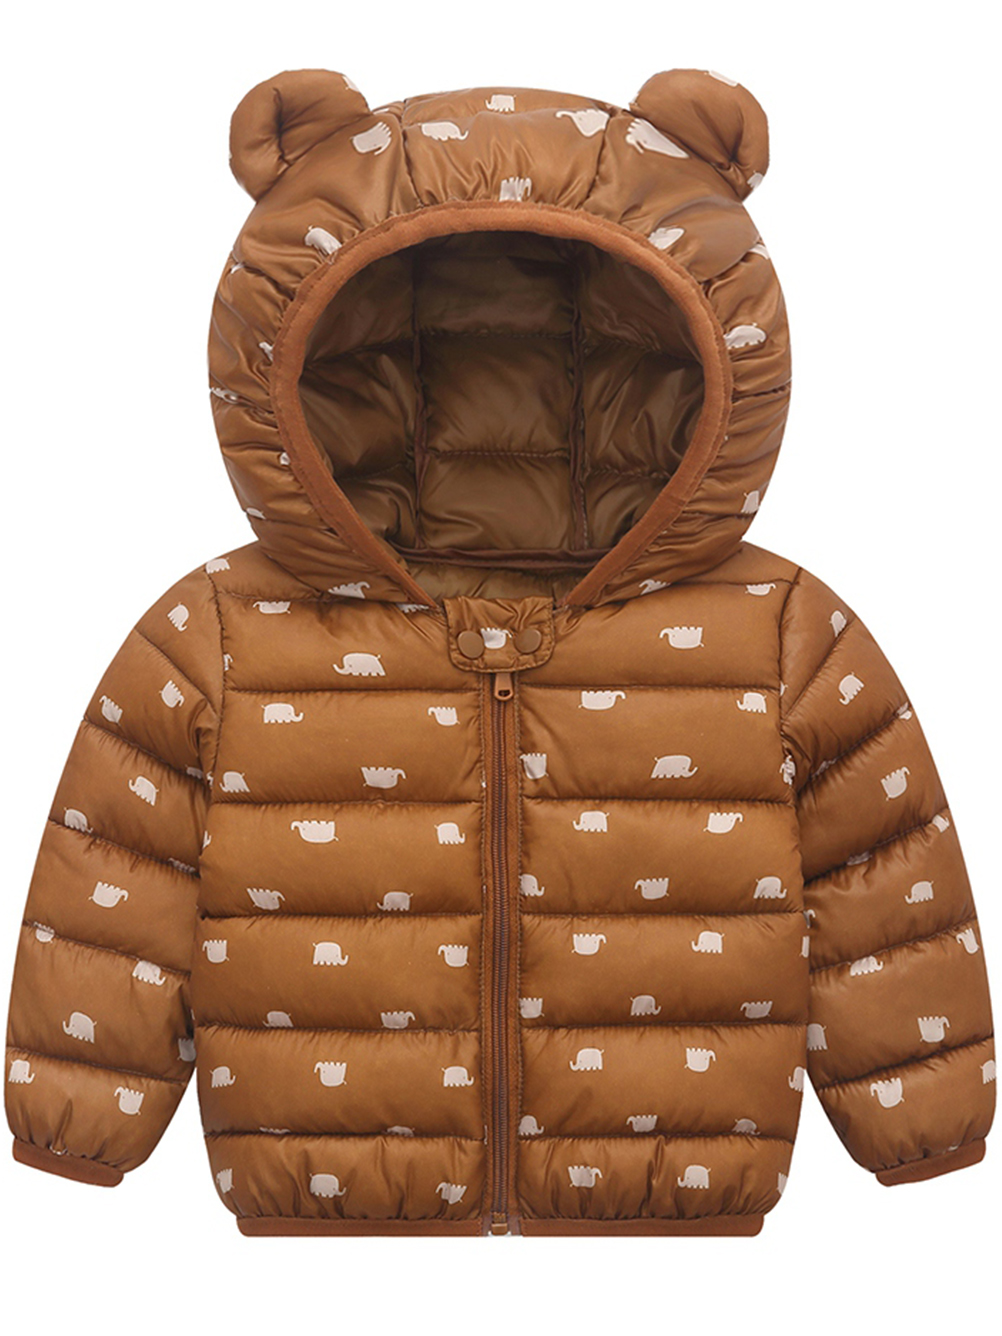 Maxcozy Kids Baby Boy Girl Winter Animal Printed Zipper Warm Coat Down Jacket Toddler Outwear For 1-5T - image 1 of 3